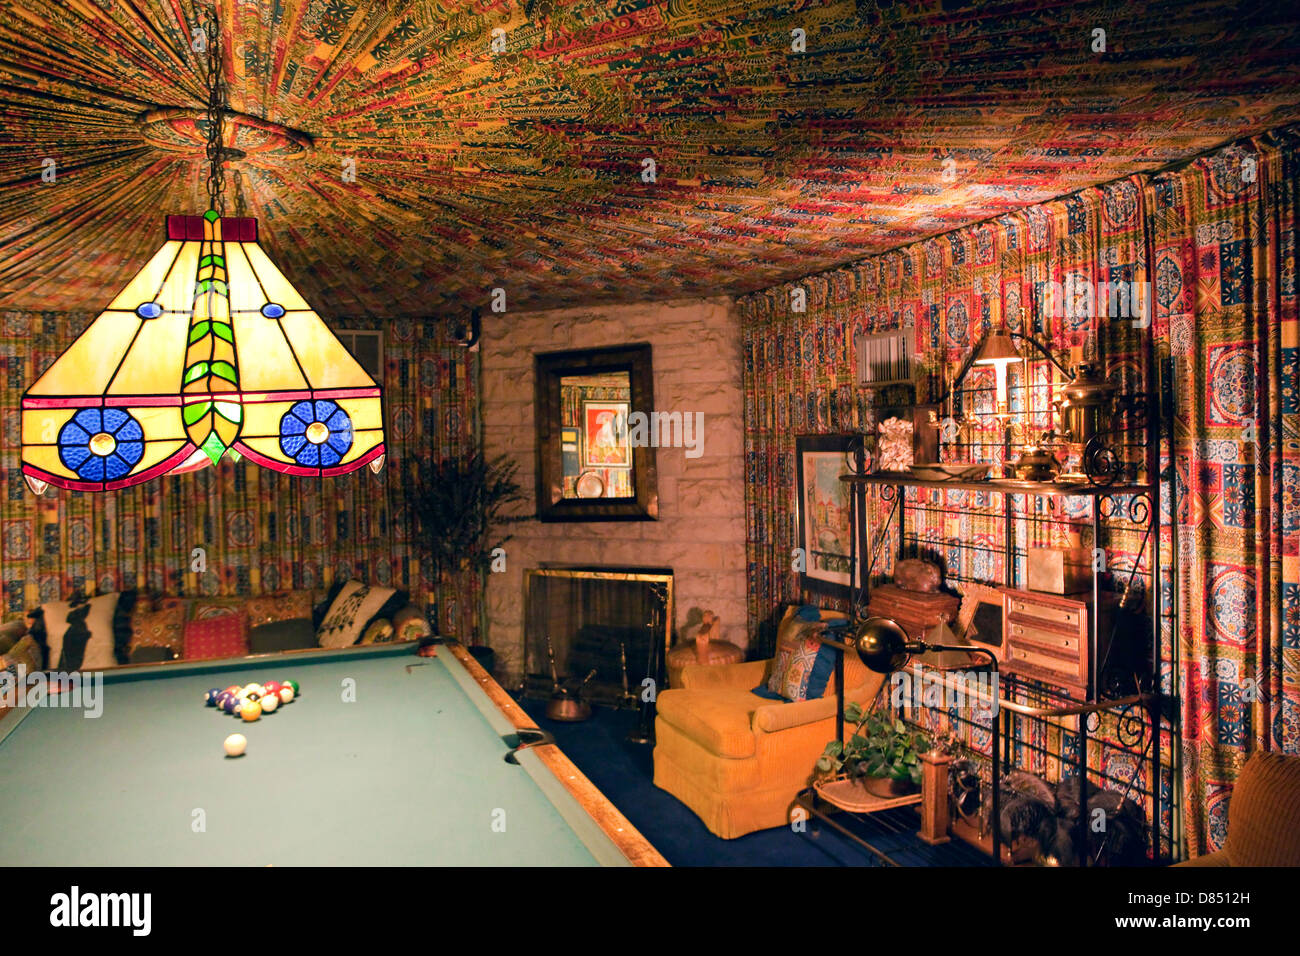 A view of the Pool Room in Elvis Presley's mansion Graceland in Memphis, Tennessee Stock Photo